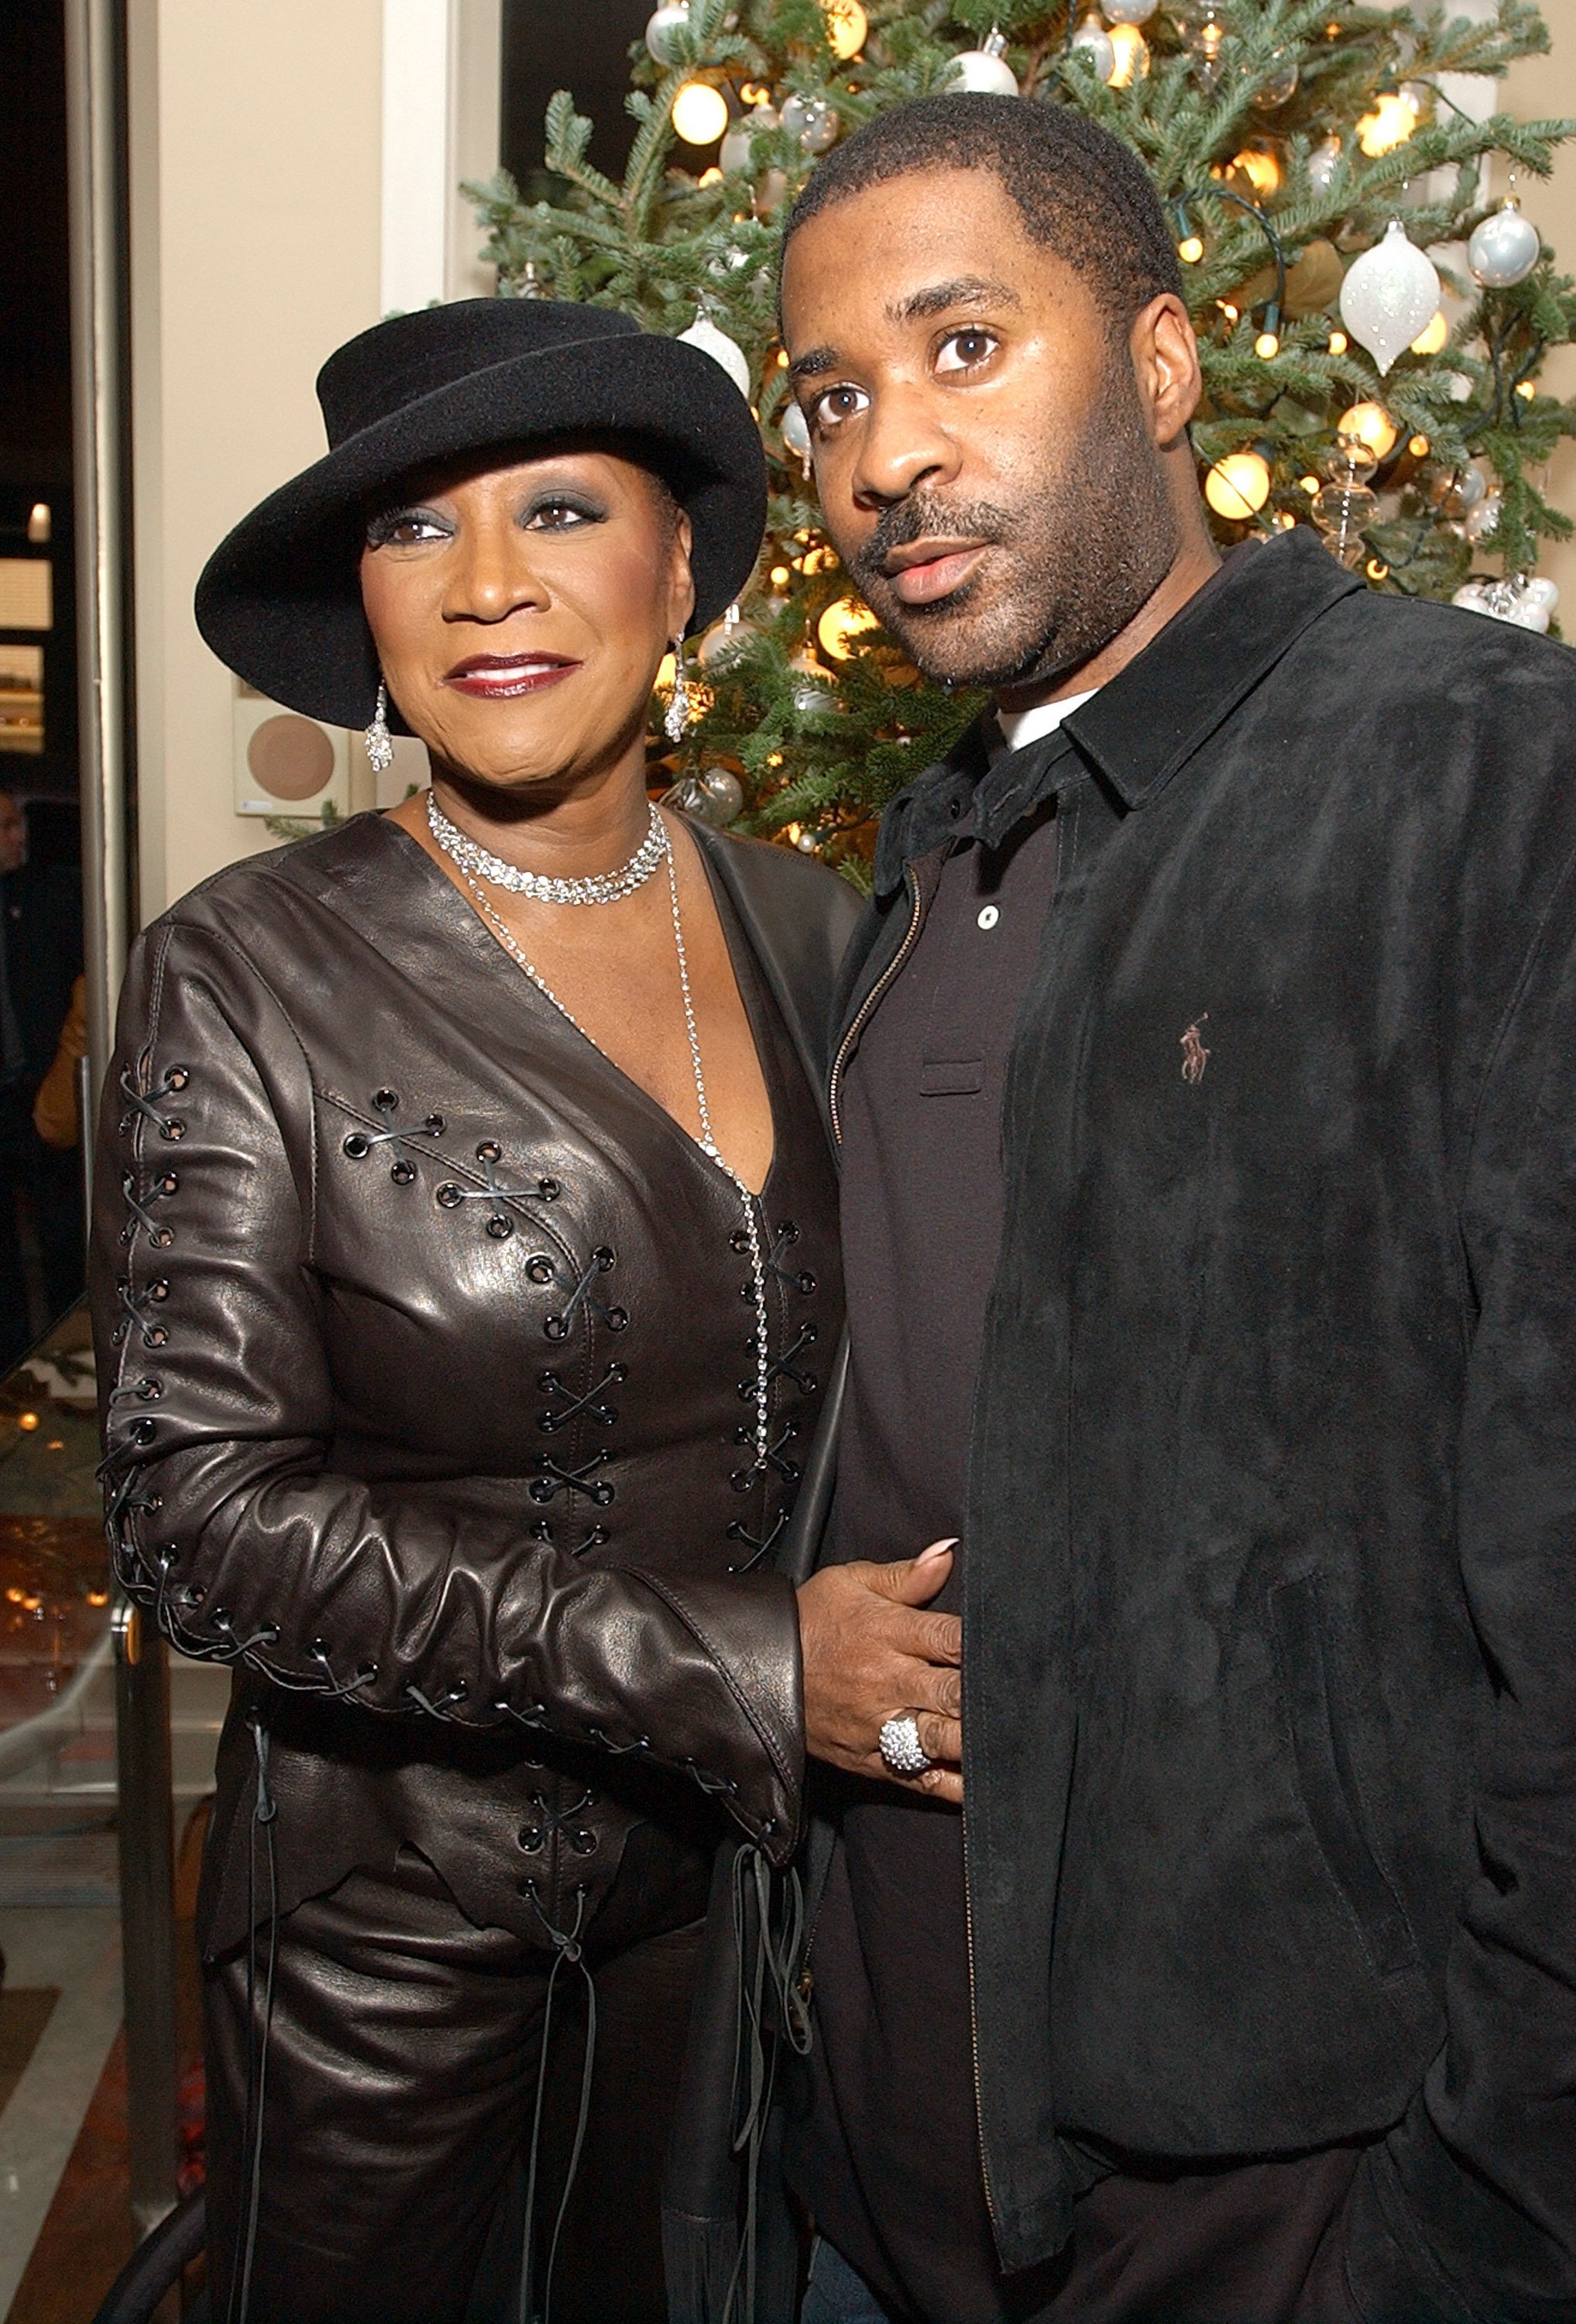 Patti LaBelle and Zuri Kye Edwards pose at Lloyd Boston's Book Launch Party for "Make Over Your Man: A Woman's Guide to Dressing Any Man in Her Life" on unspecified date and location | Source: Getty Images